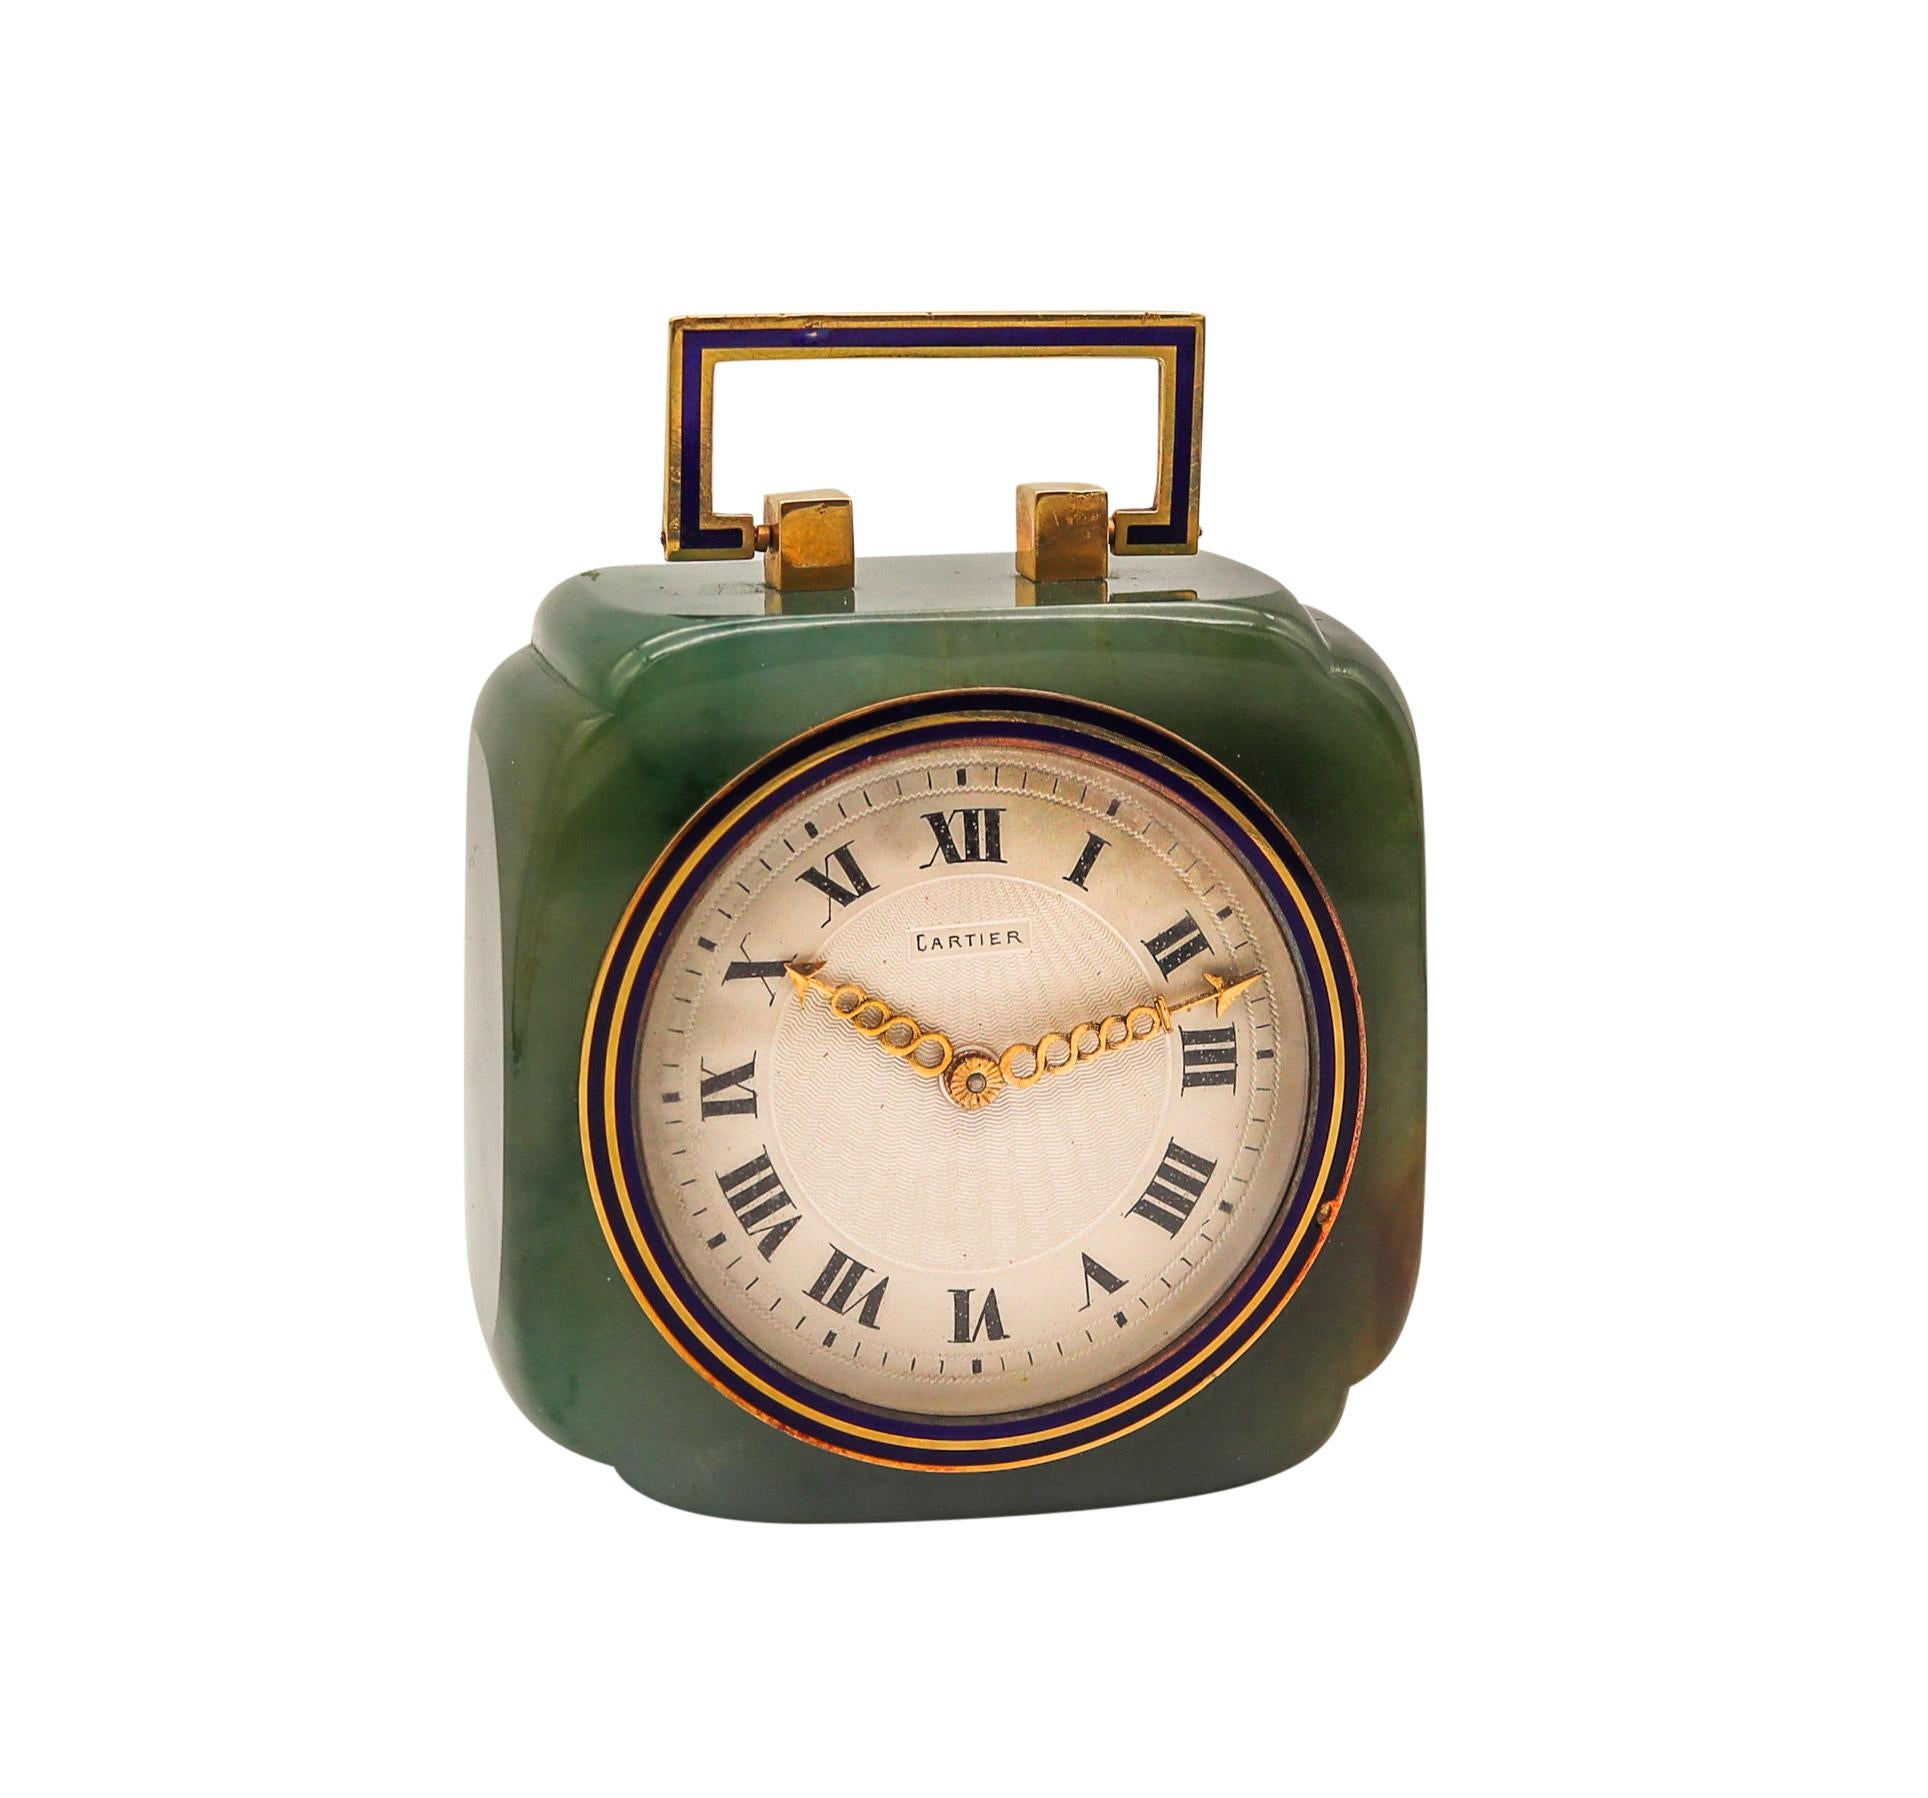 Hand-Crafted Cartier Paris 1920 Art Deco Chinoiserie 18kt Desk Clock in Nephrite Jade Enamel For Sale